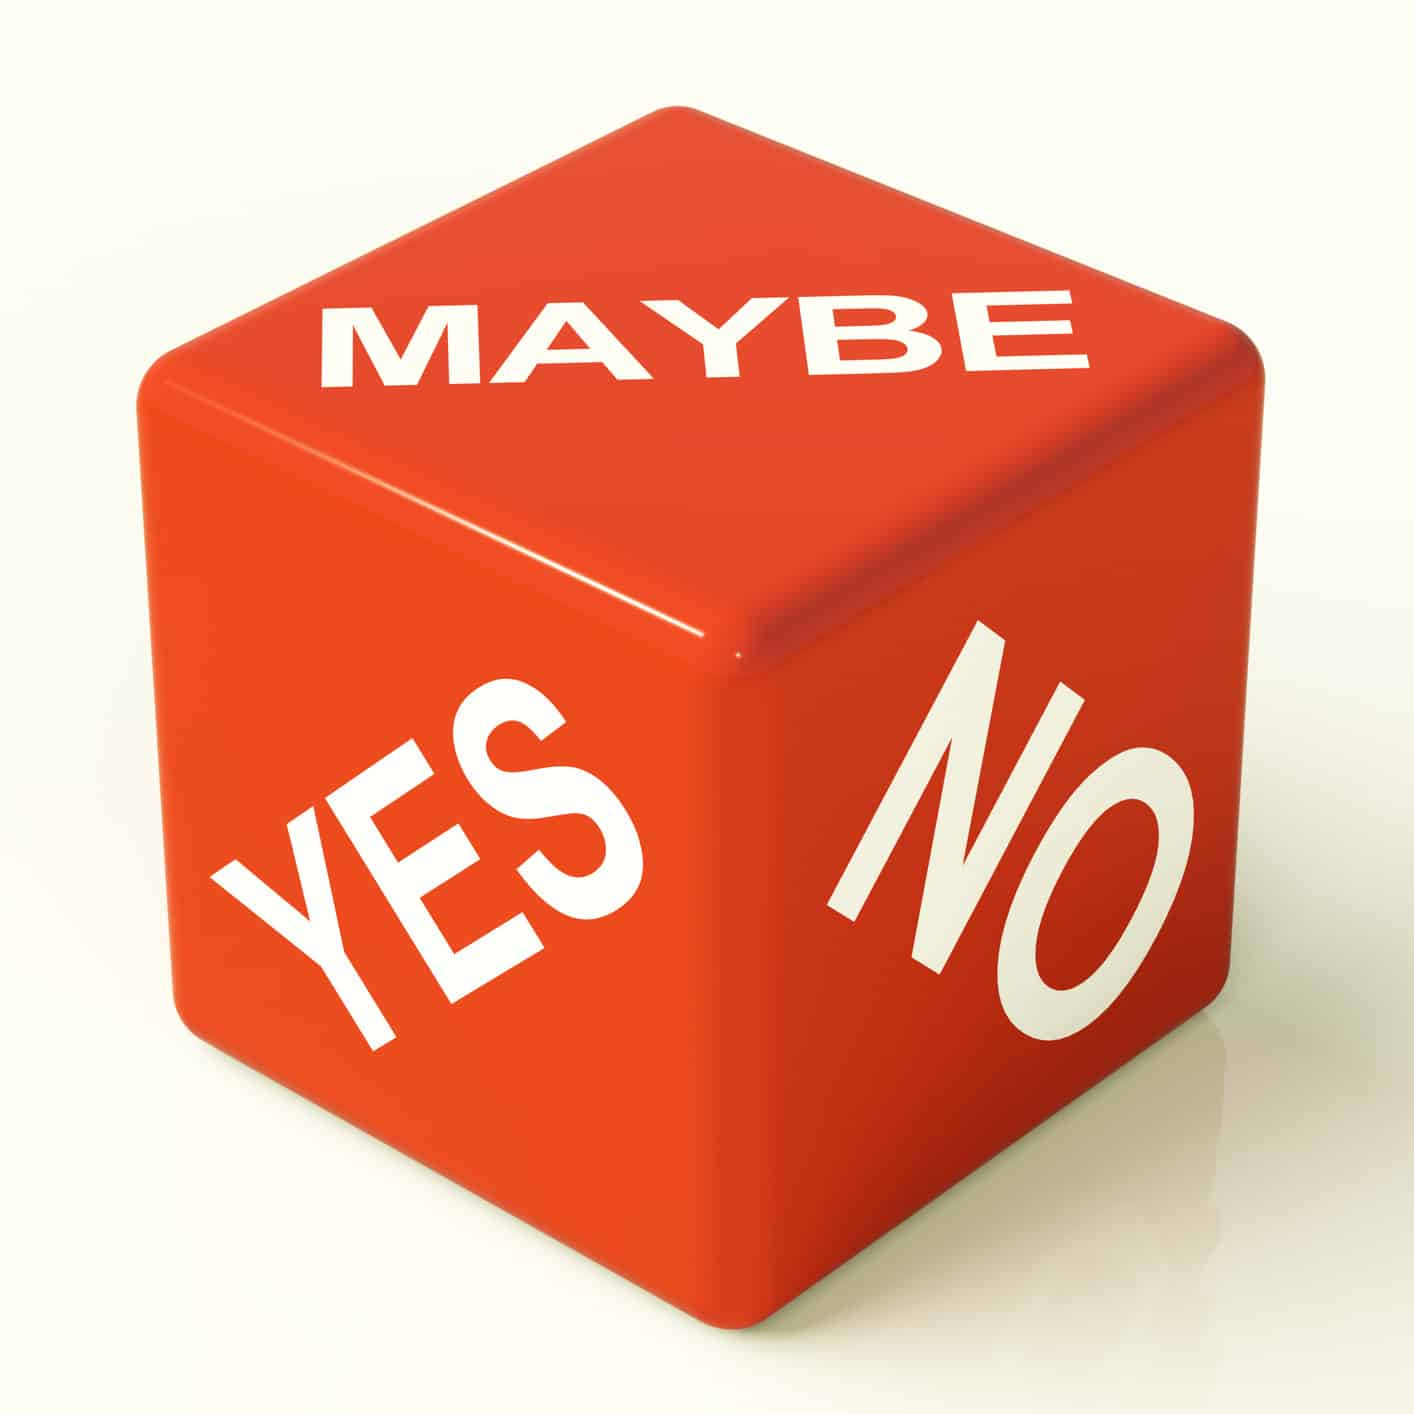 yes no maybe clipart - photo #18